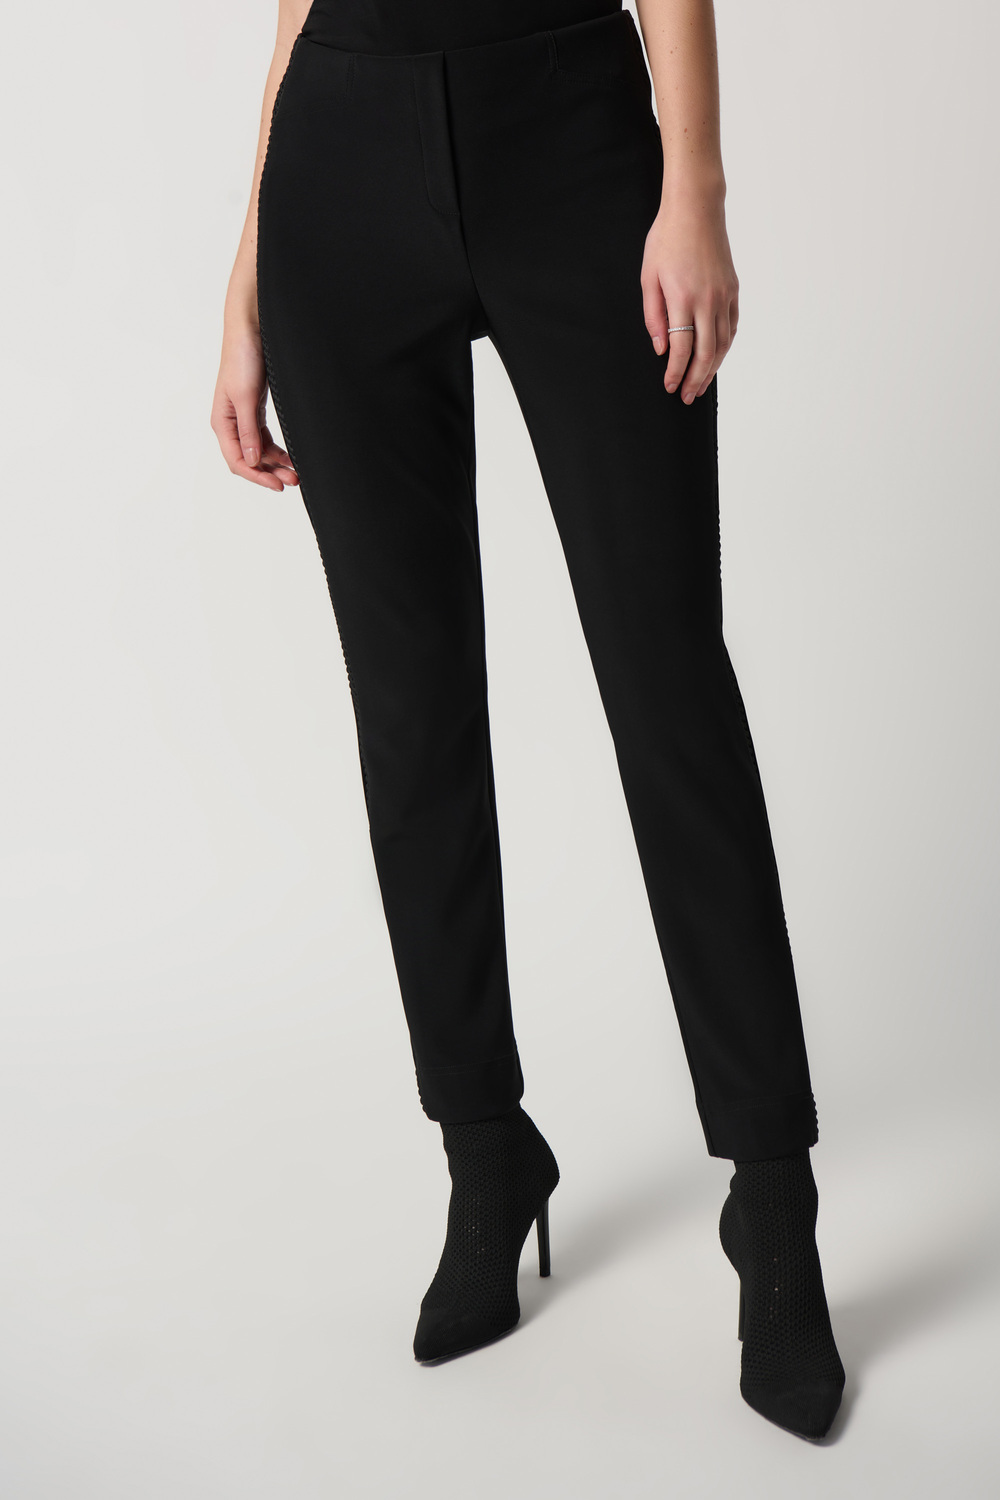 Textured High-Rise Pants Style 234235. Black